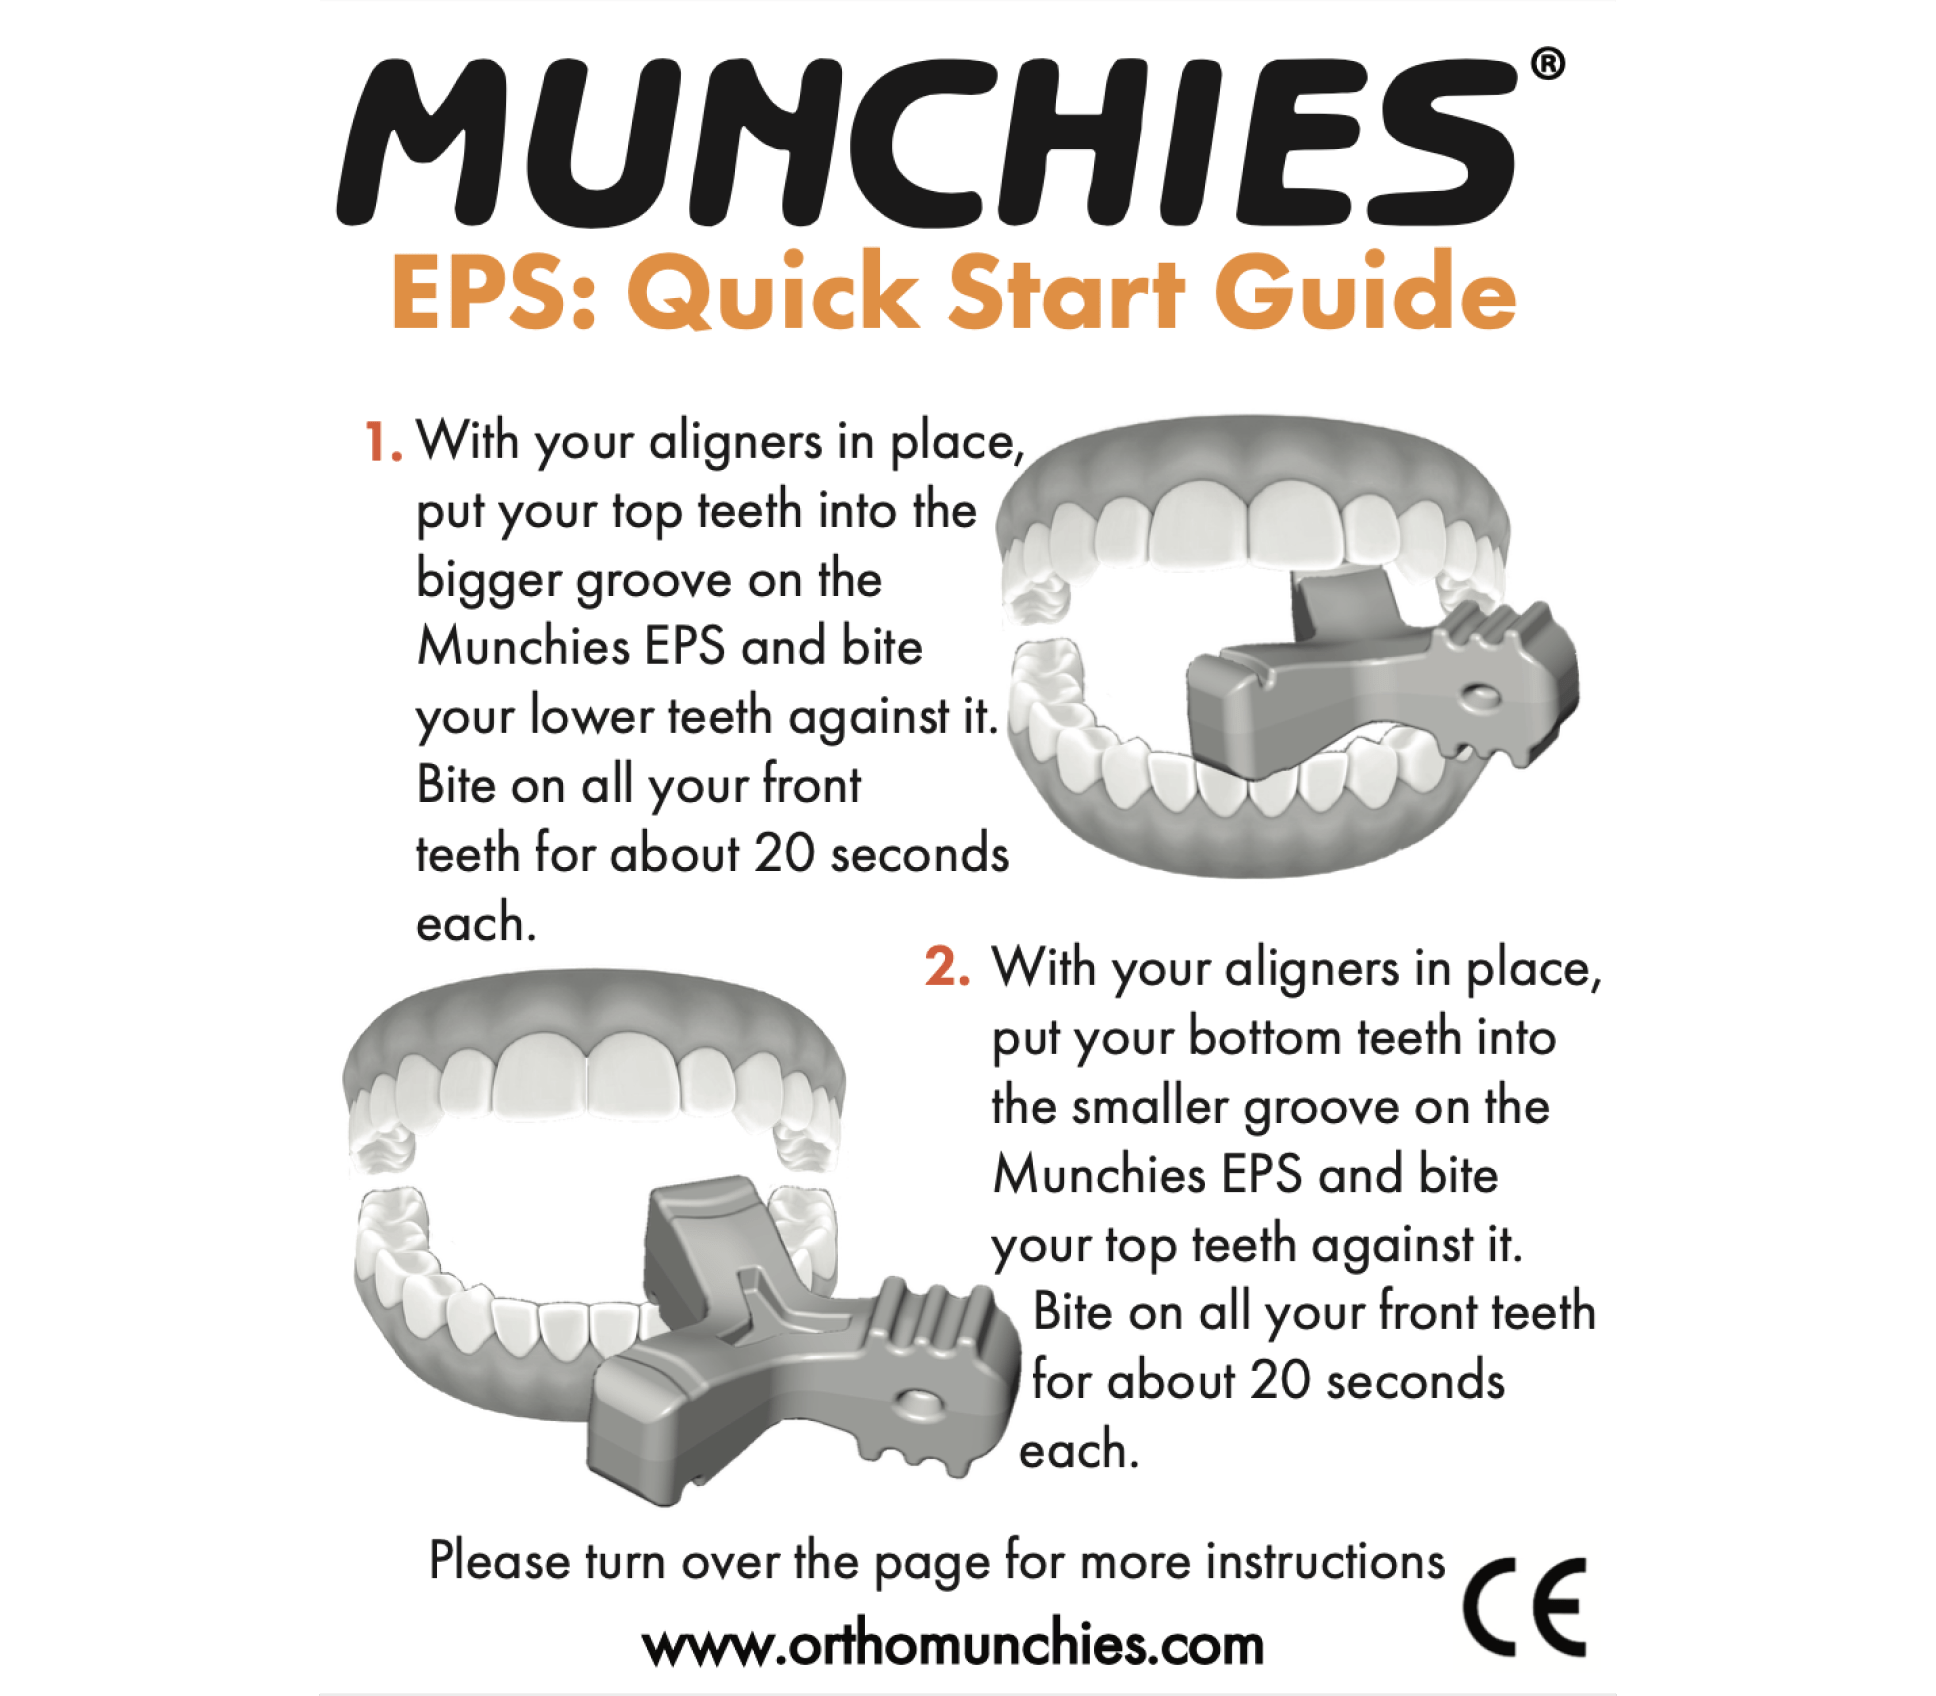 Image of Munchies® EPS Quick Start Guide